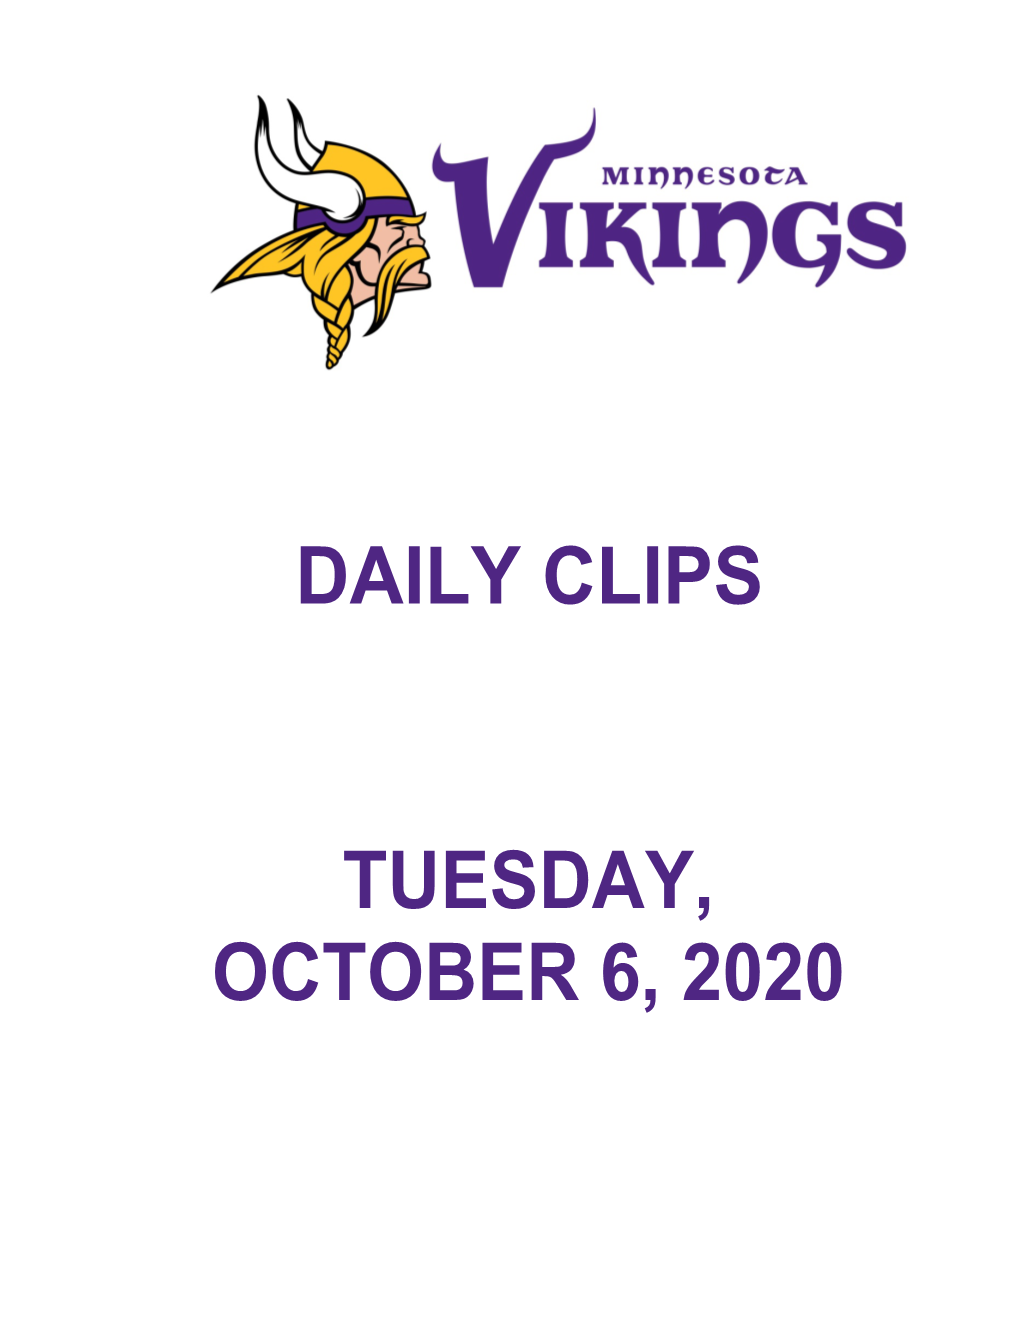 Daily Clips Tuesday, October 6, 2020